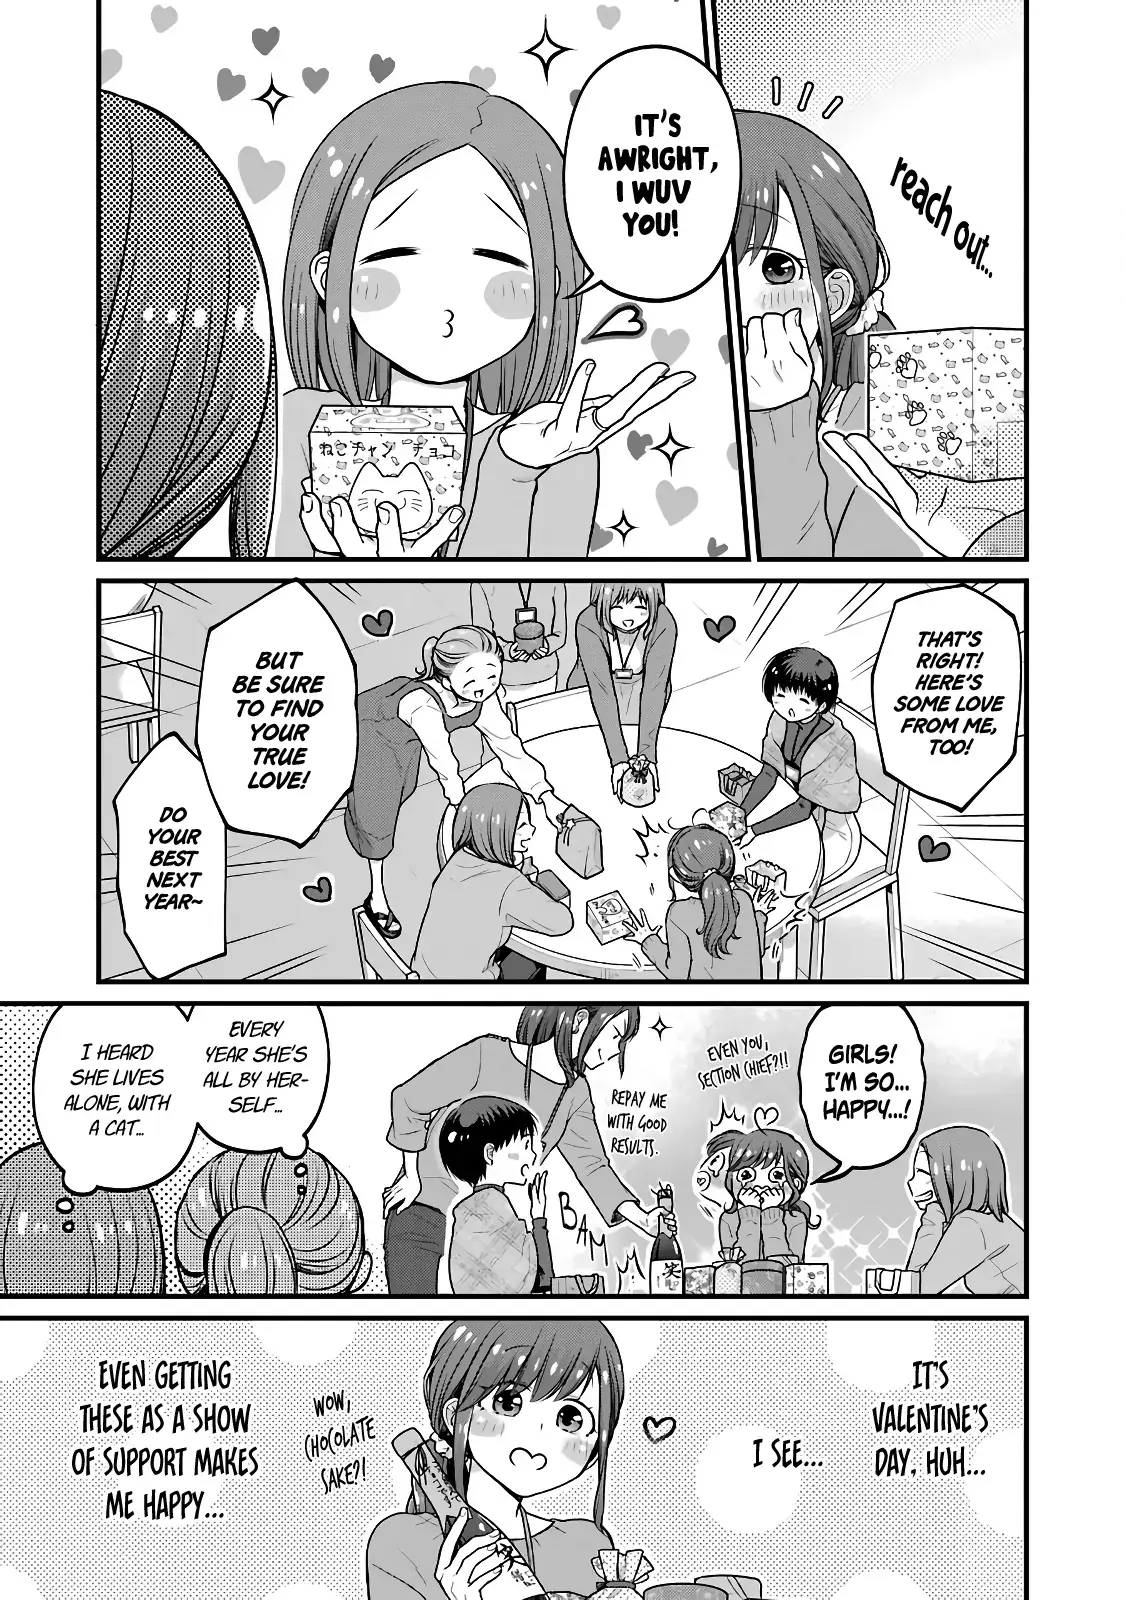 5 Minutes With You At A Convenience Store - 79 page 3-3f57219e